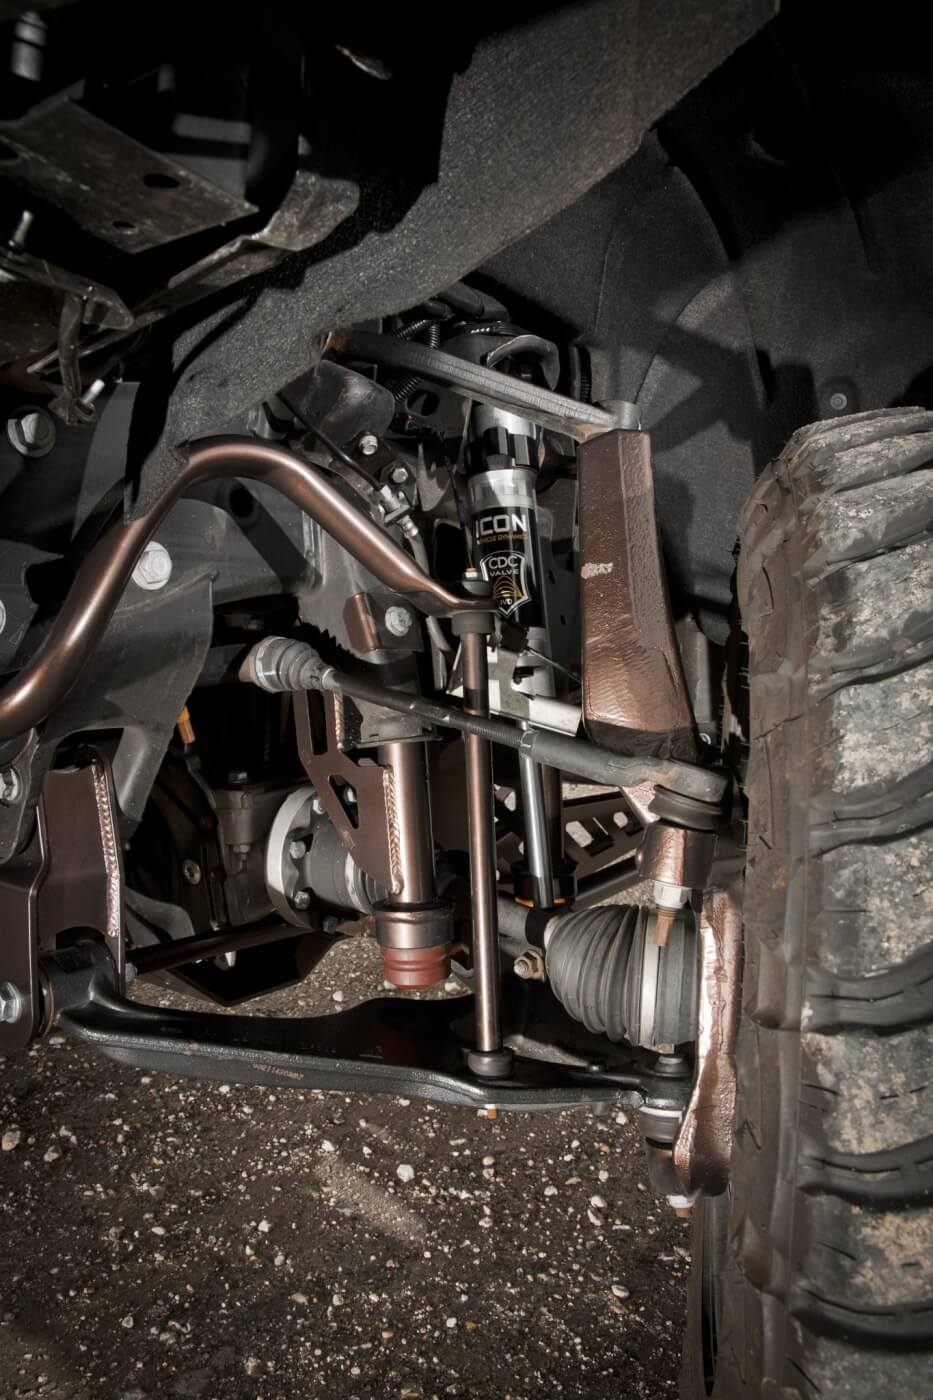 The McGaughys suspension kit is virtually a bolt-on system, No cutting or grinding of the front or rear differential is required, and only a few new holes are drilled. Here you see part of the front suspension. Notice the A-arm lowering bolts, new bump stop extensions, new steering knuckles (spindles) and Icon shocks. All are powder coated to match the body color.